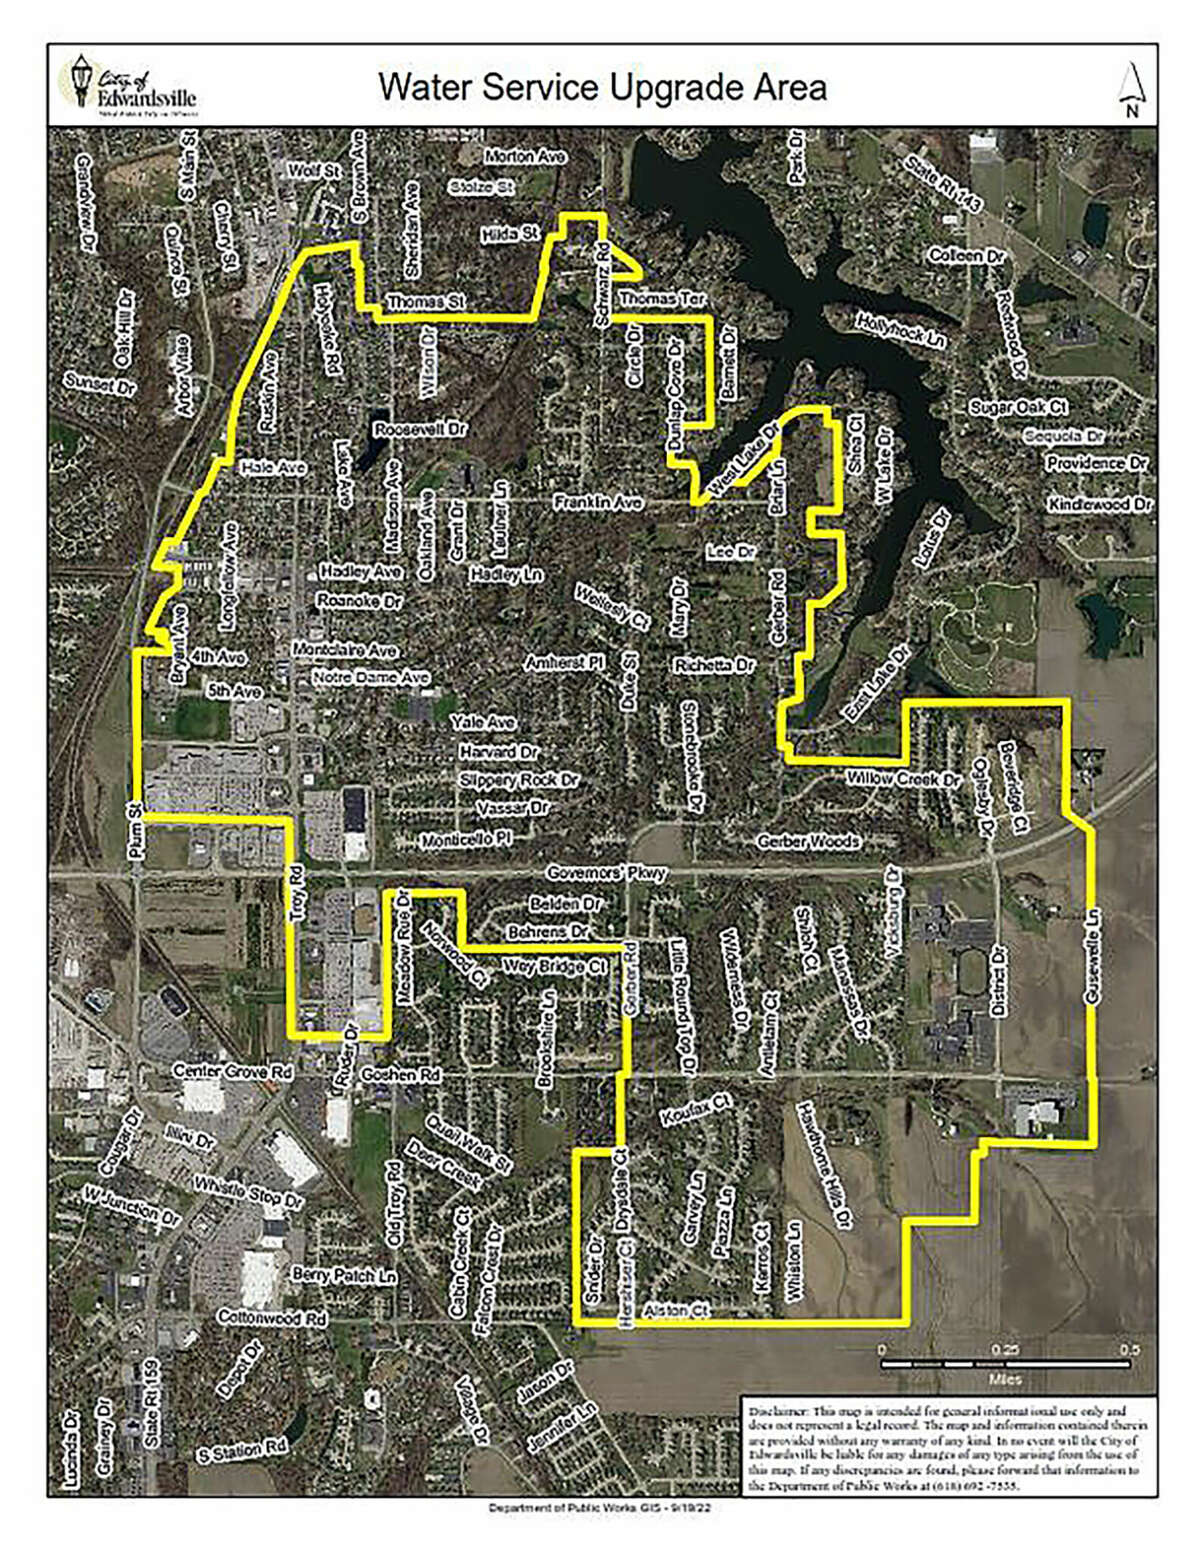 Anywhere within the yellow border is where the first phase of the water meter changeout will happen in Edwardsville. 